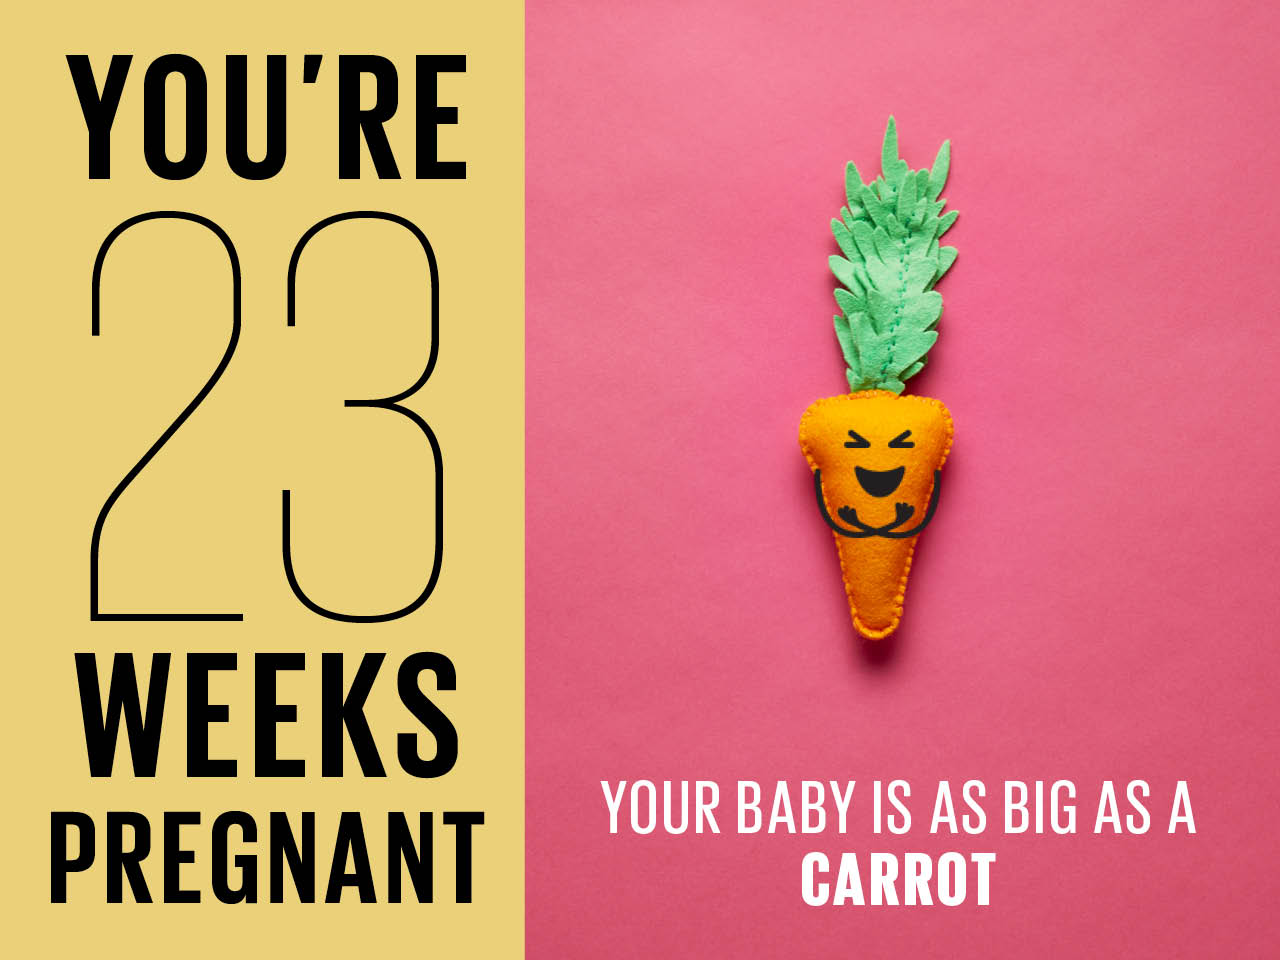 23 weeks pregnant baby size pictured with felt carrot